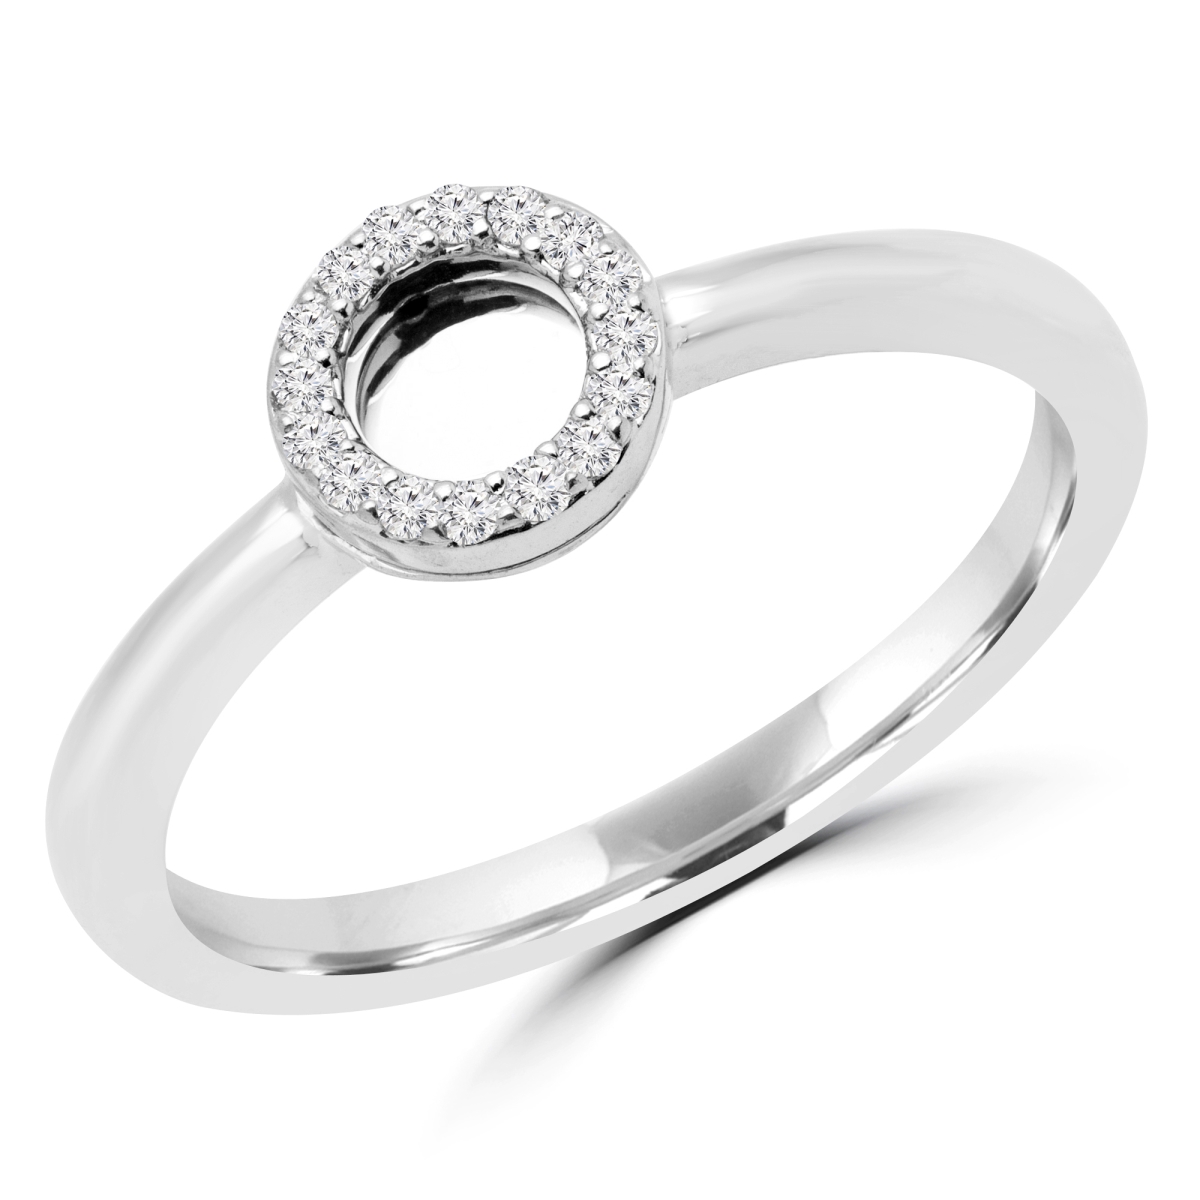 Picture of Majesty Diamonds MDR170066-3.5 0.1 CTW Round Diamond Cocktail Ring in 14K White Gold - Size 3.5